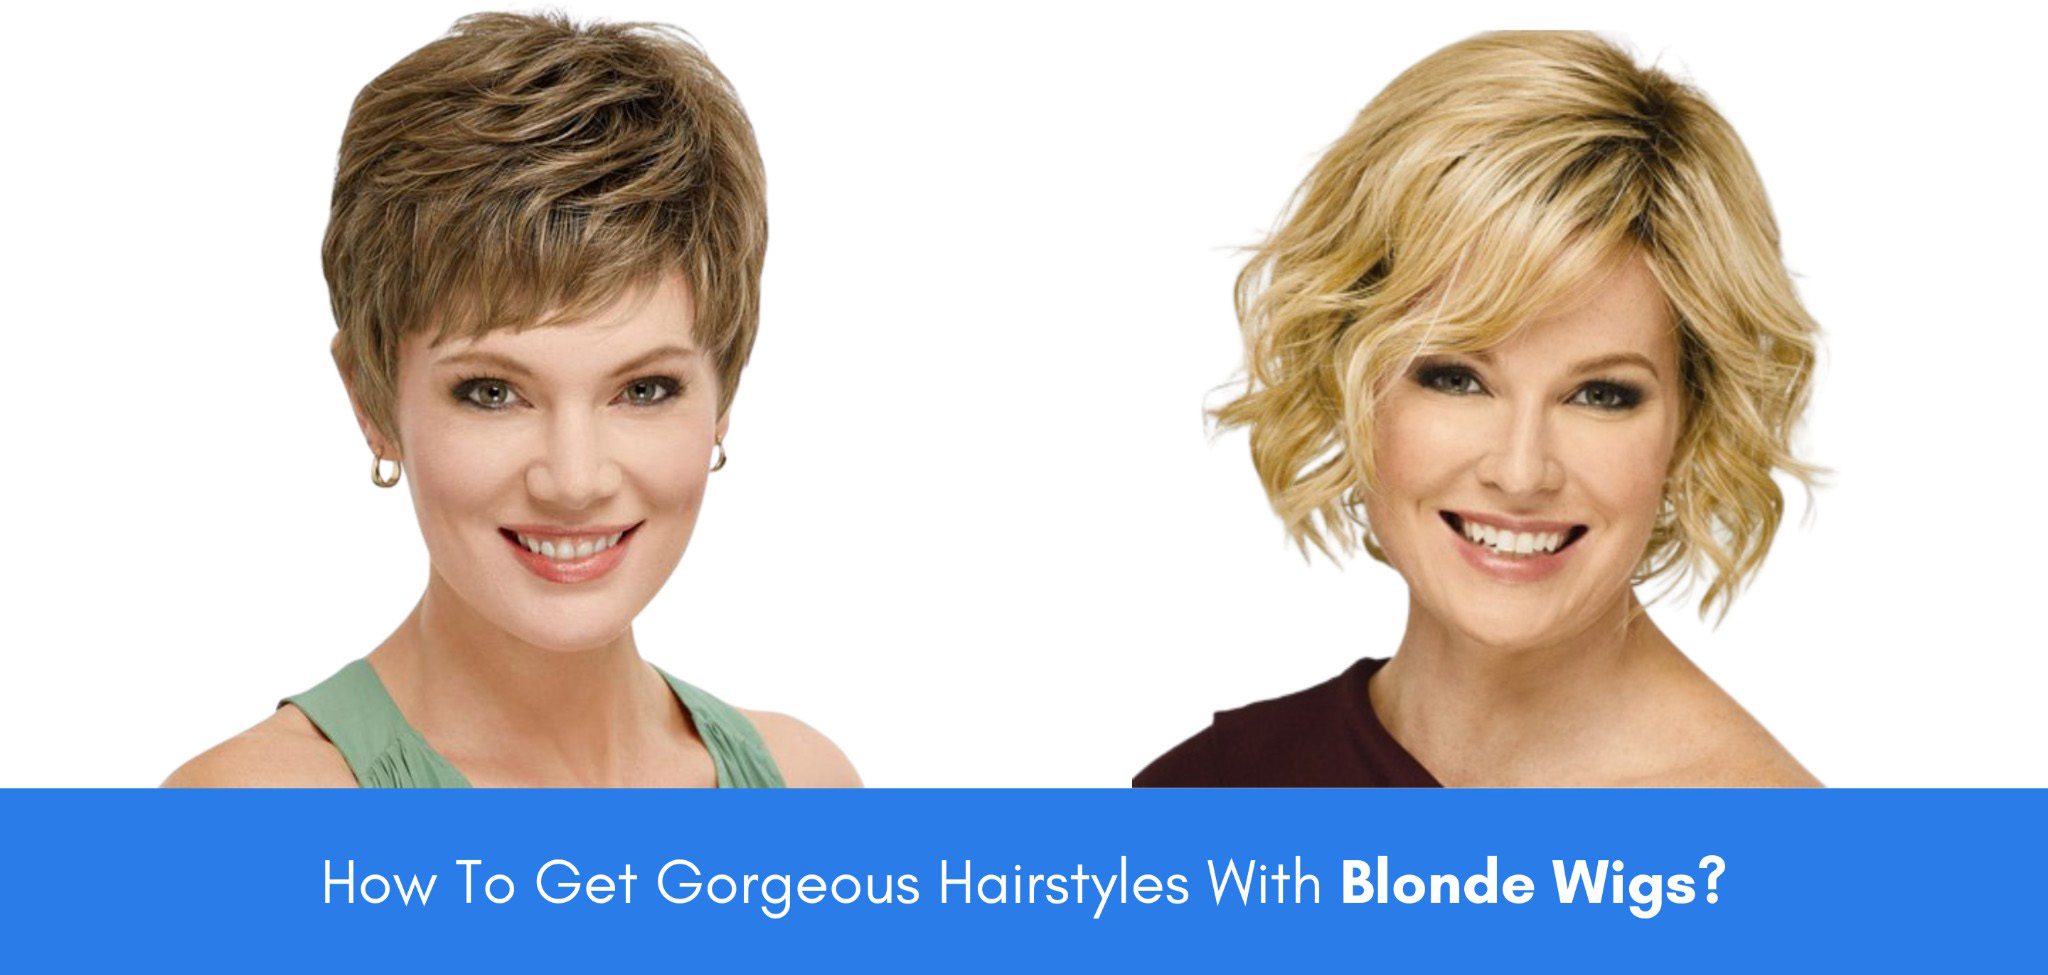 How To Get Gorgeous Hairstyles With Blonde Wigs? | Wig.com